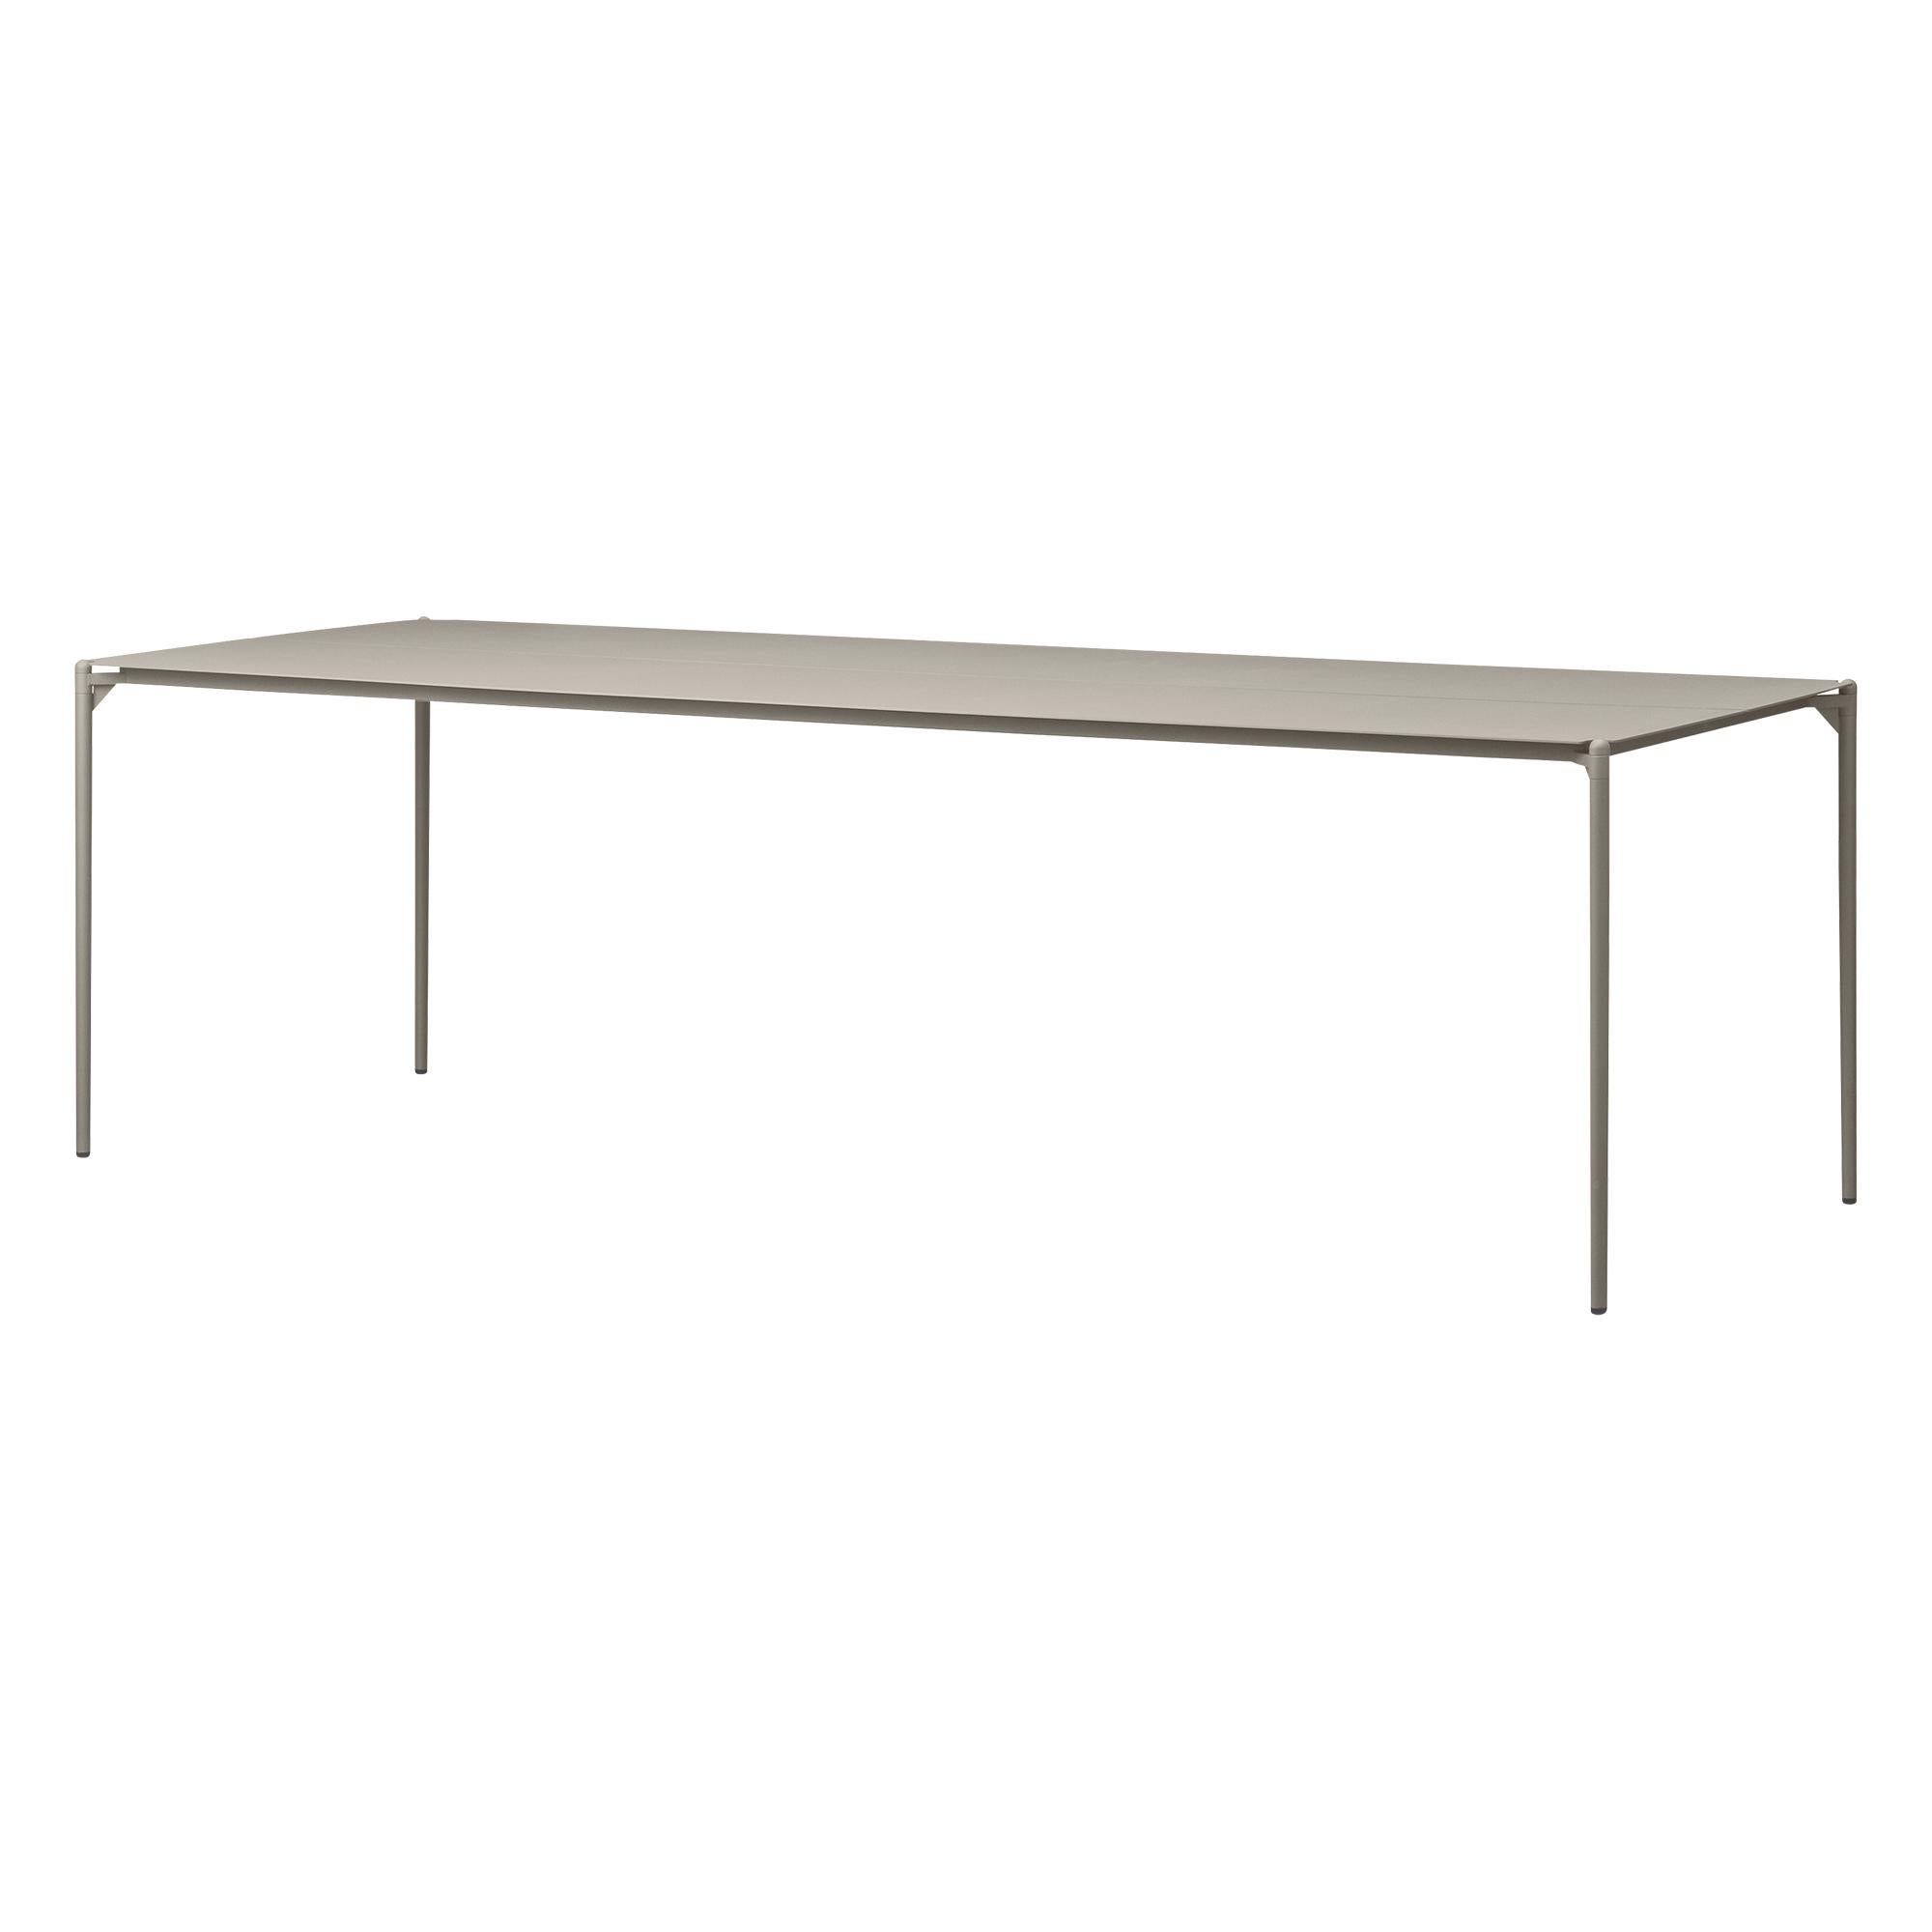 Large taupe minimalist table
Dimensions: D 240 x W 90 x H 72 cm 
Materials: Steel w. Matte Powder Coating & Aluminum w. Matte Powder Coating.
Available in colors: Taupe, Bordeaux, Forest, Ginger Bread, Black and, Black and Gold. 


Bring